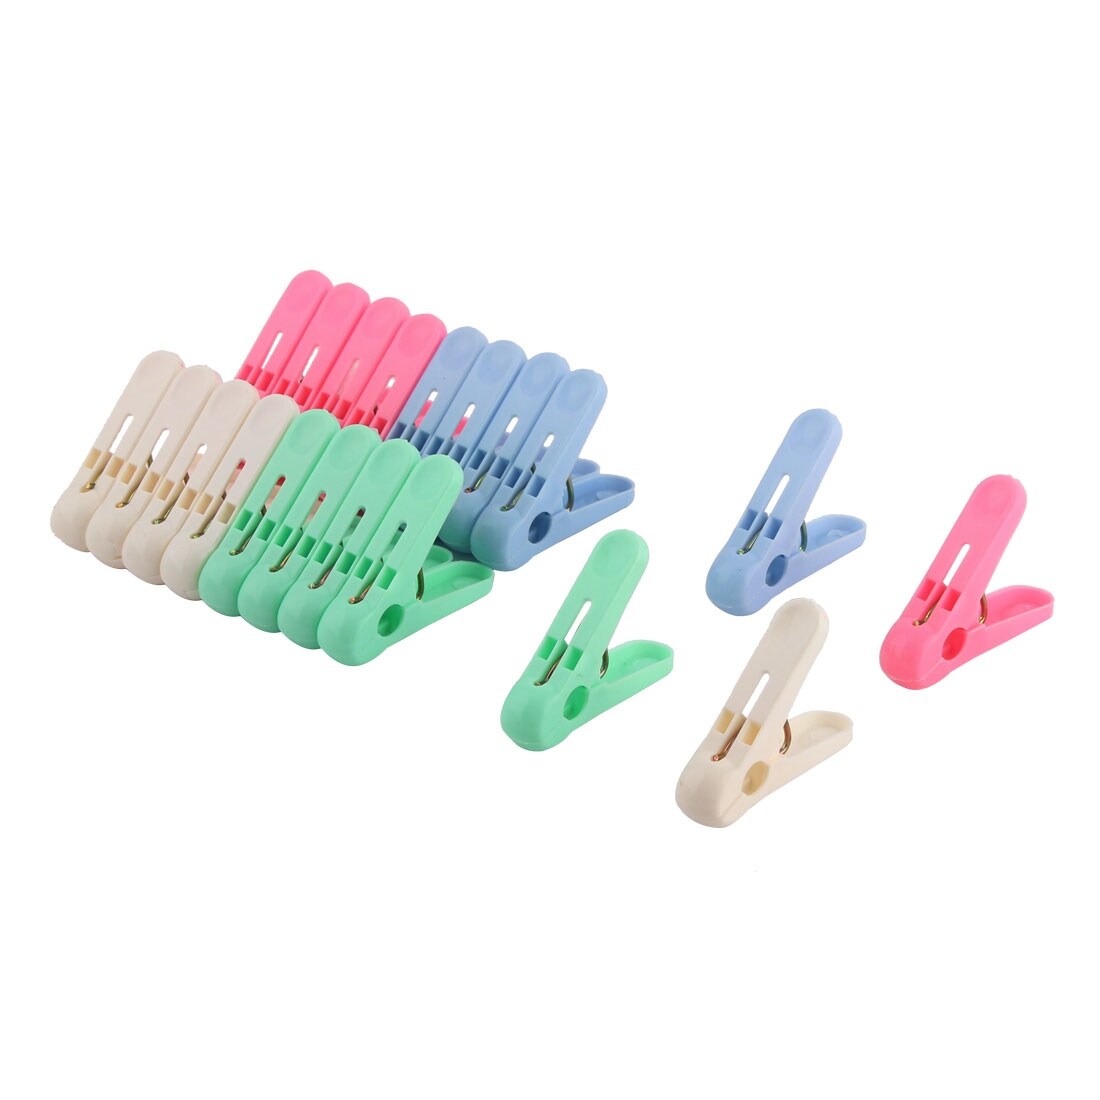 Unique Bargains Plastic Laundry Clothes Drying Pegs Clips Pins Clothespins Assorted Color 20pcs, Size: One Size